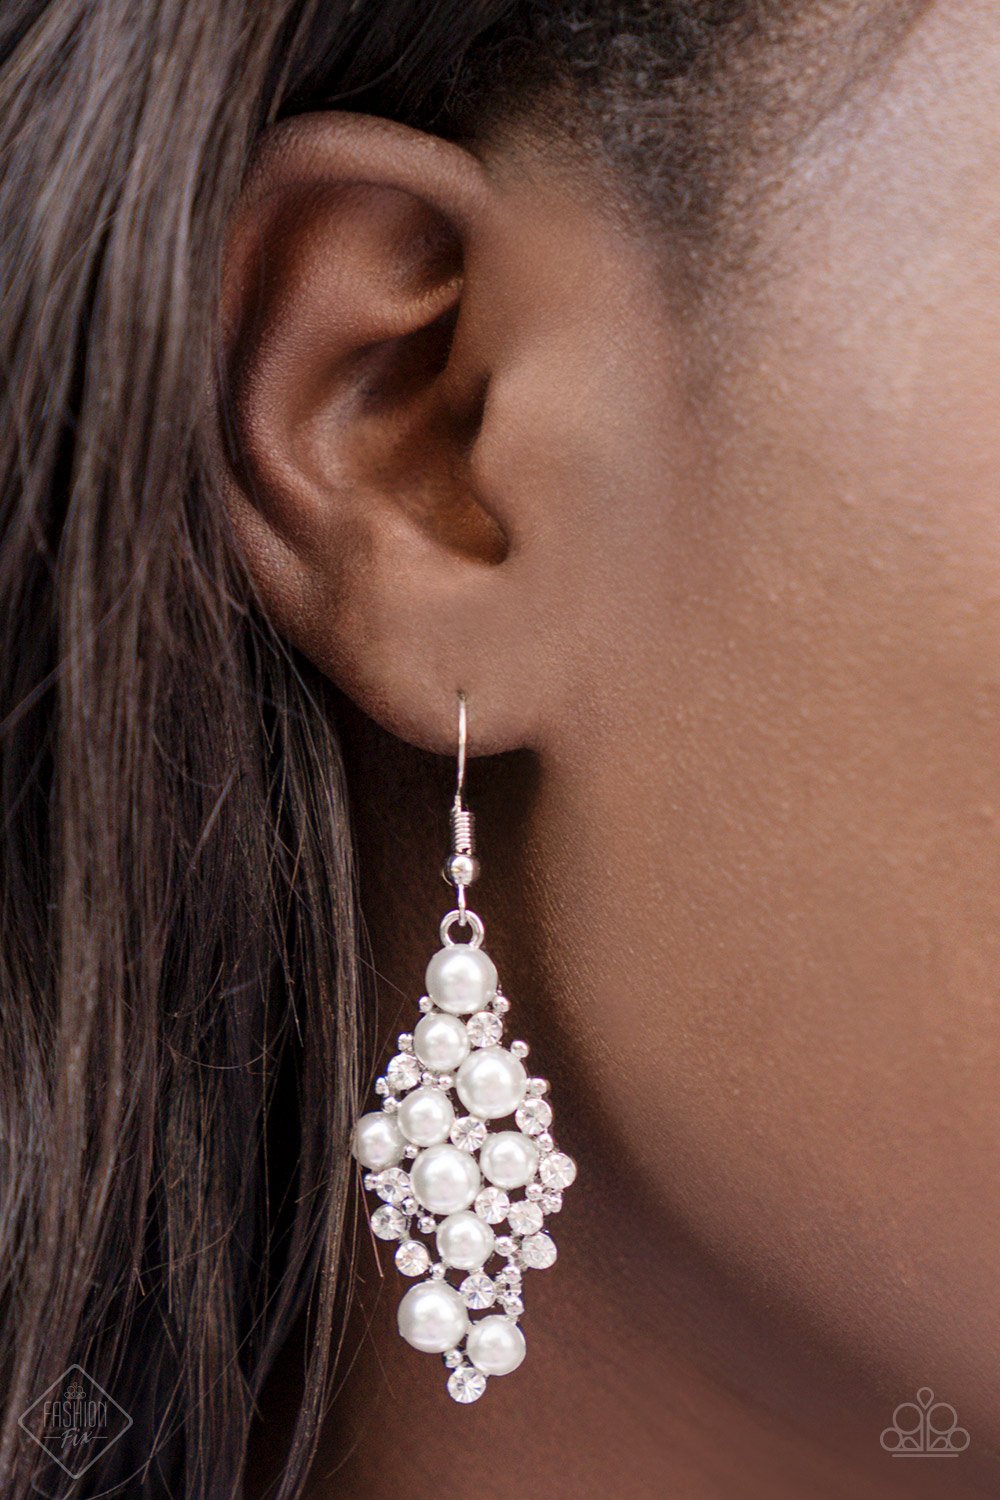 Paparazzi Accessories Famous Fashion- White Earrings 